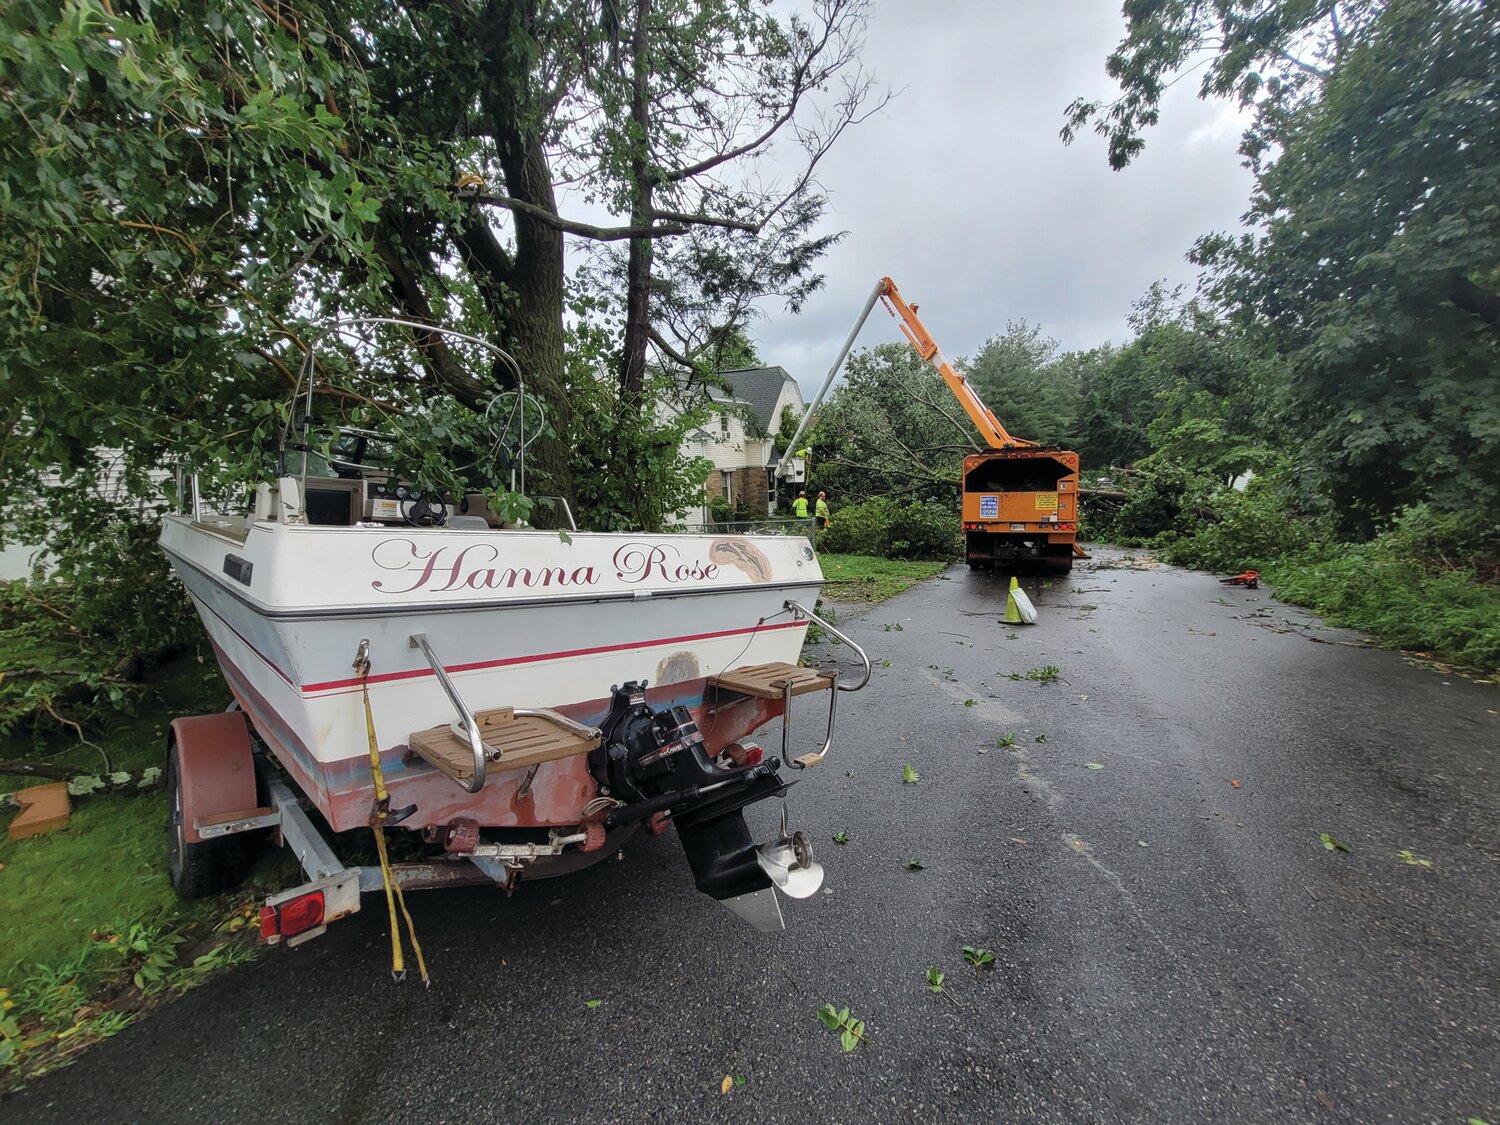 BOAT LOAD OF DAMAGE: This boat was tossed into the trees, and a few trees fell onto Amber Street houses. Residents were unable to exit via George Waterman for hours following the storm.